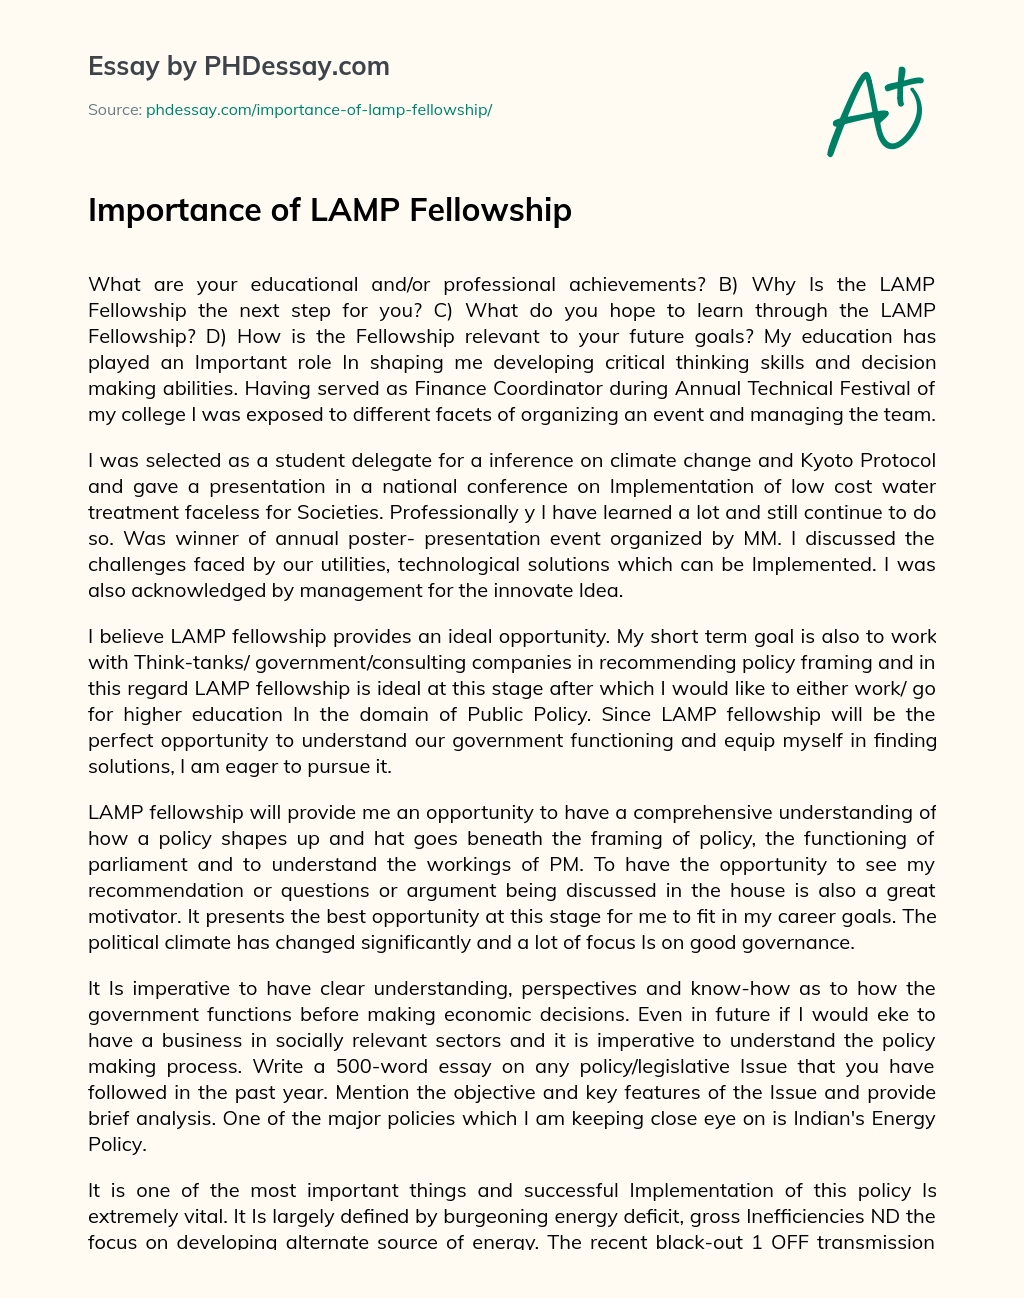 how to write essay for lamp fellowship